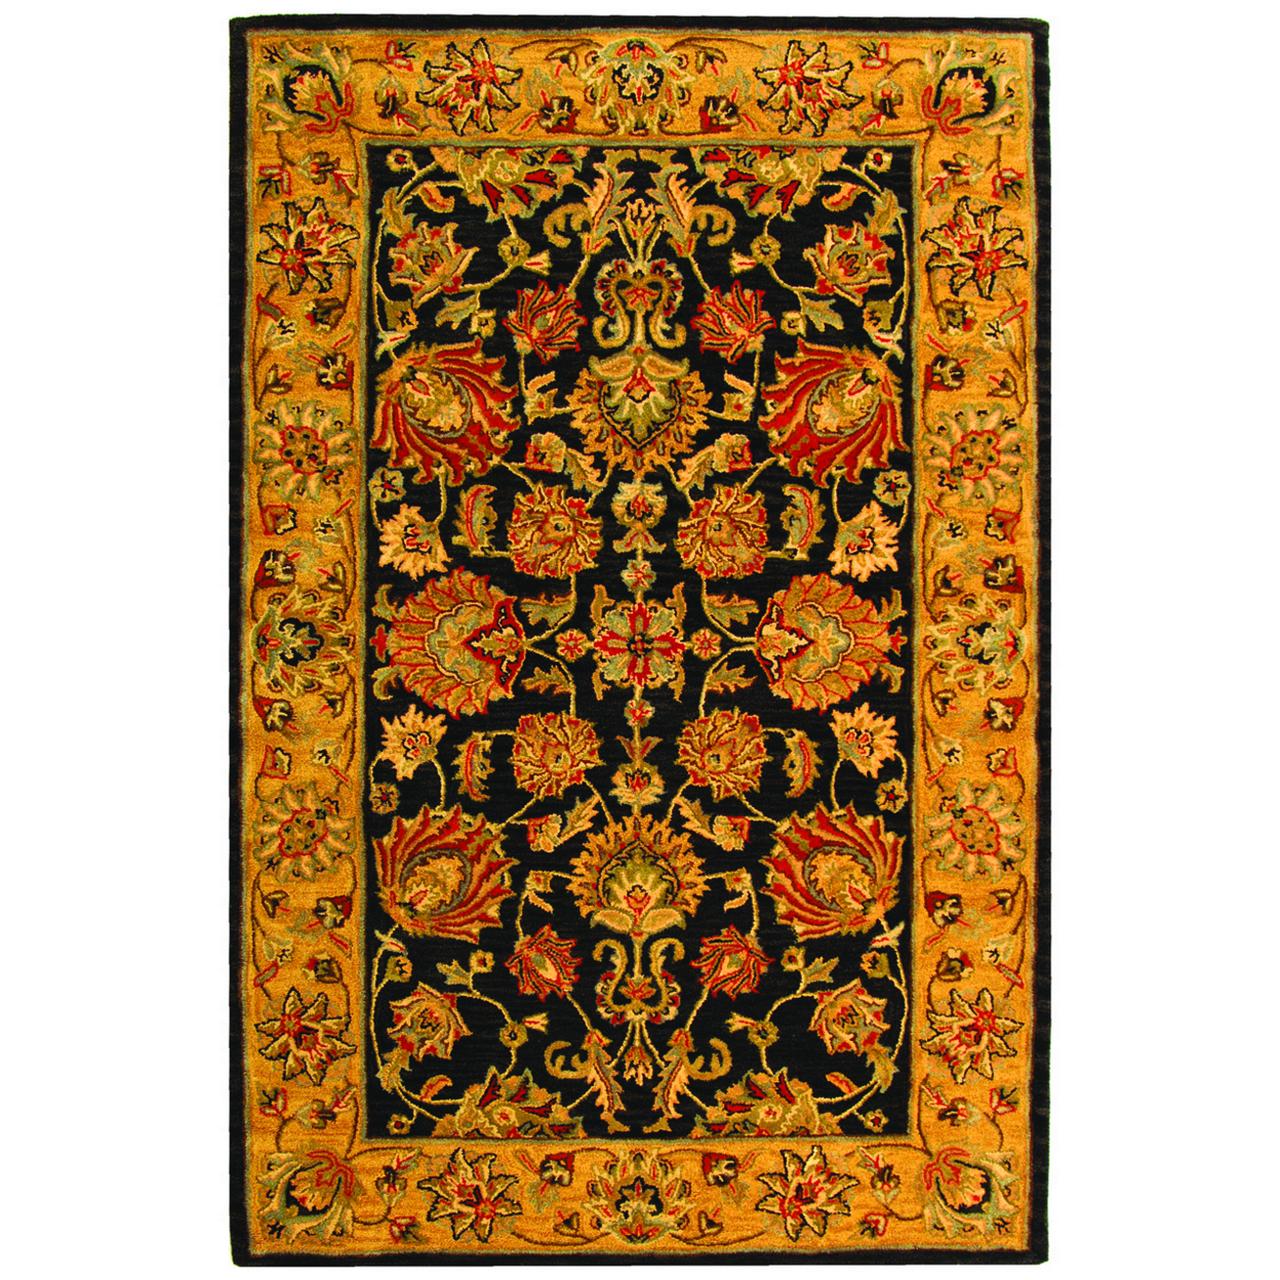 SAFAVIEH Heritage Regis Traditional Wool Area Rug, Charcoal/Gold, 4' x 6' - image 1 of 10